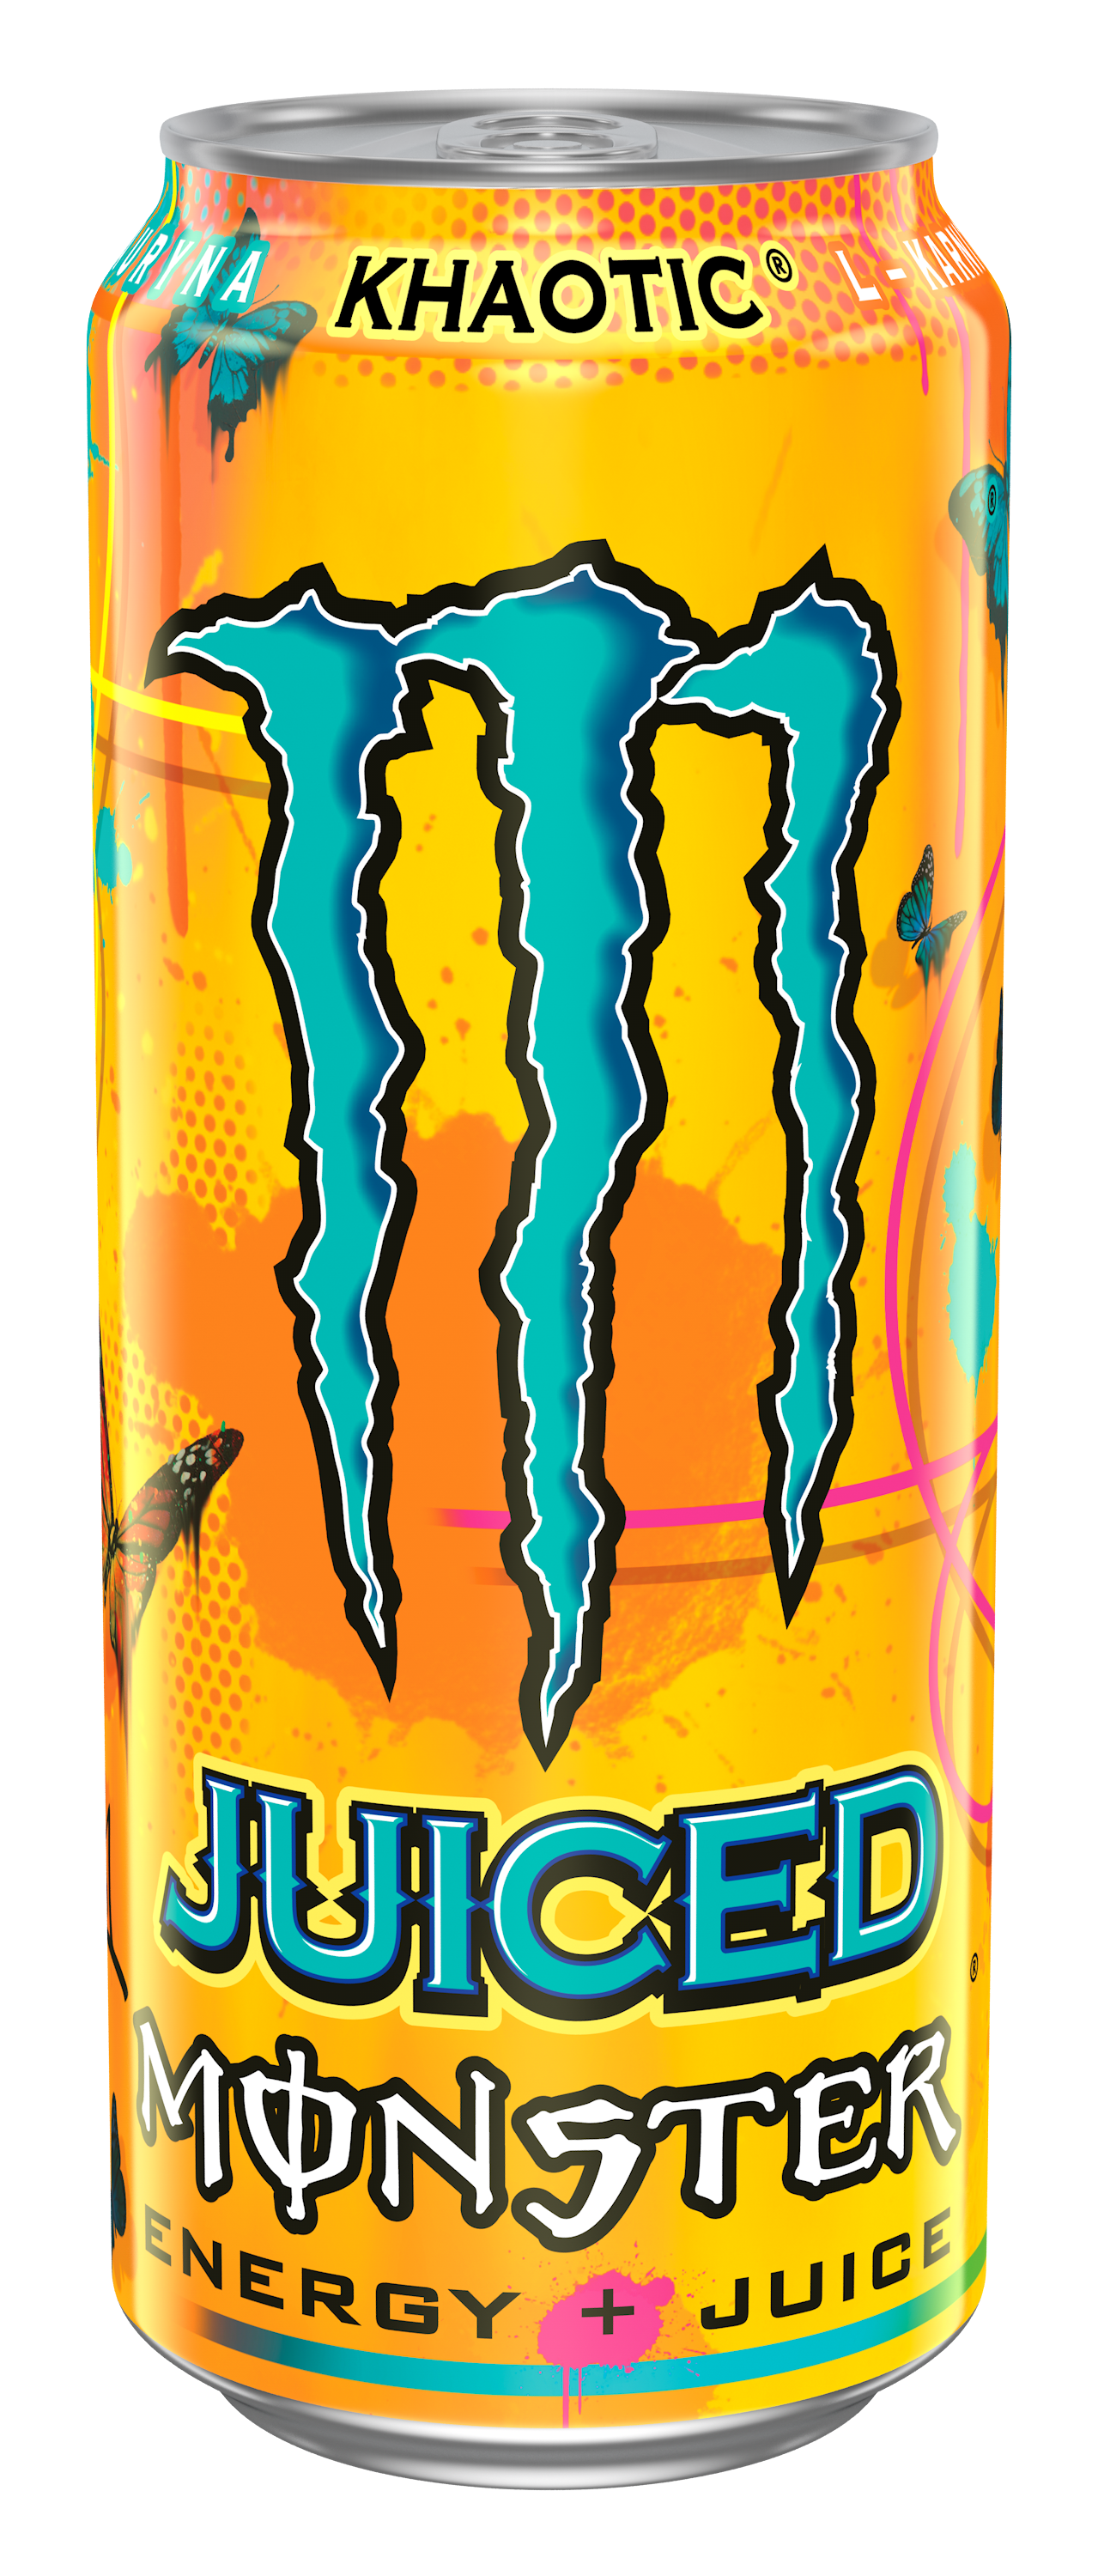 Poland_Monster_Khaotic_500ml_Can_POS_0821